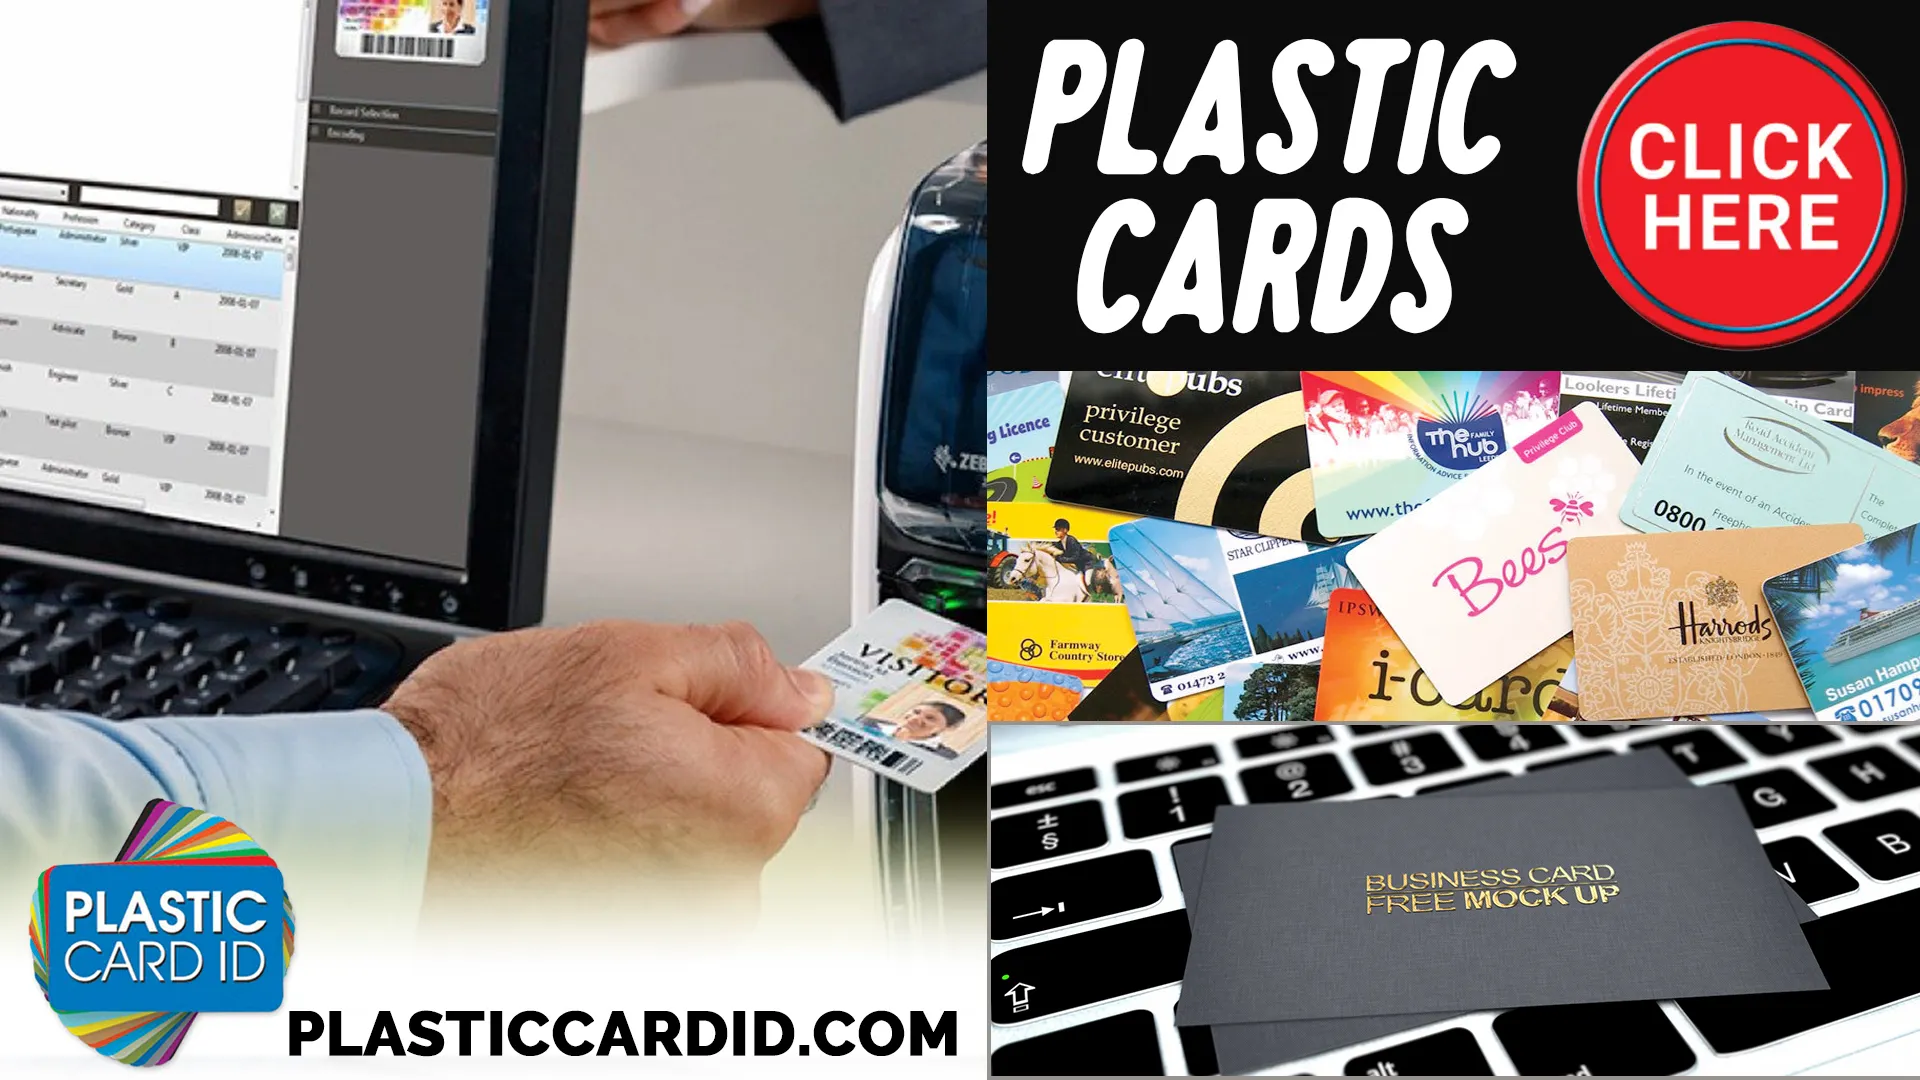 Welcome to the World of Customized Litho Printed Cards